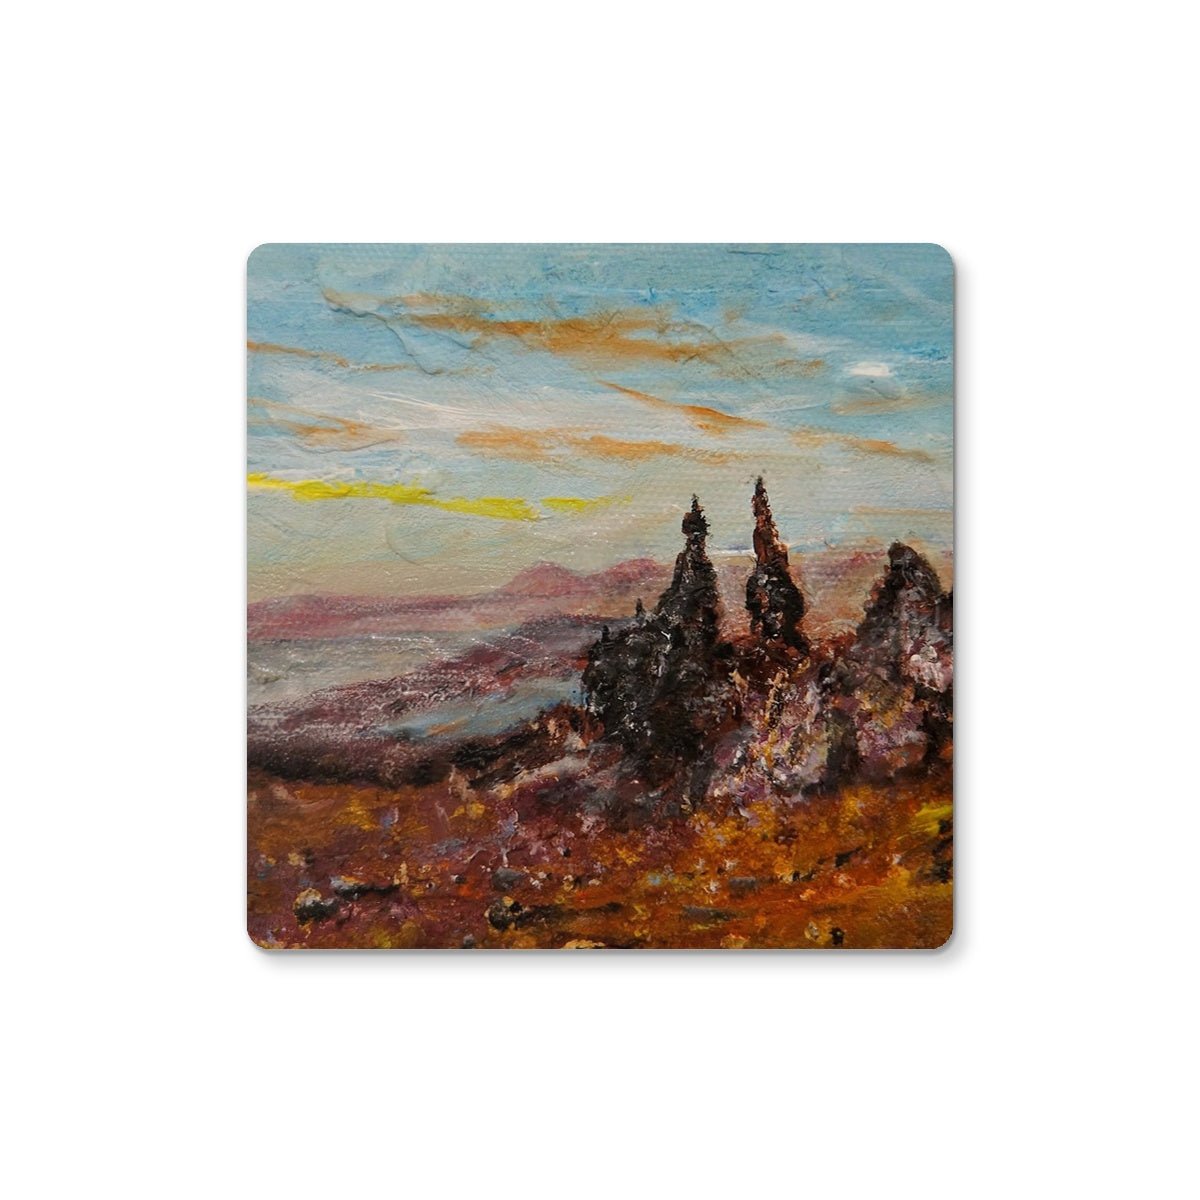 The Old Man Of Storr Skye Art Gifts Coaster-Coasters-Skye Art Gallery-4 Coasters-Paintings, Prints, Homeware, Art Gifts From Scotland By Scottish Artist Kevin Hunter